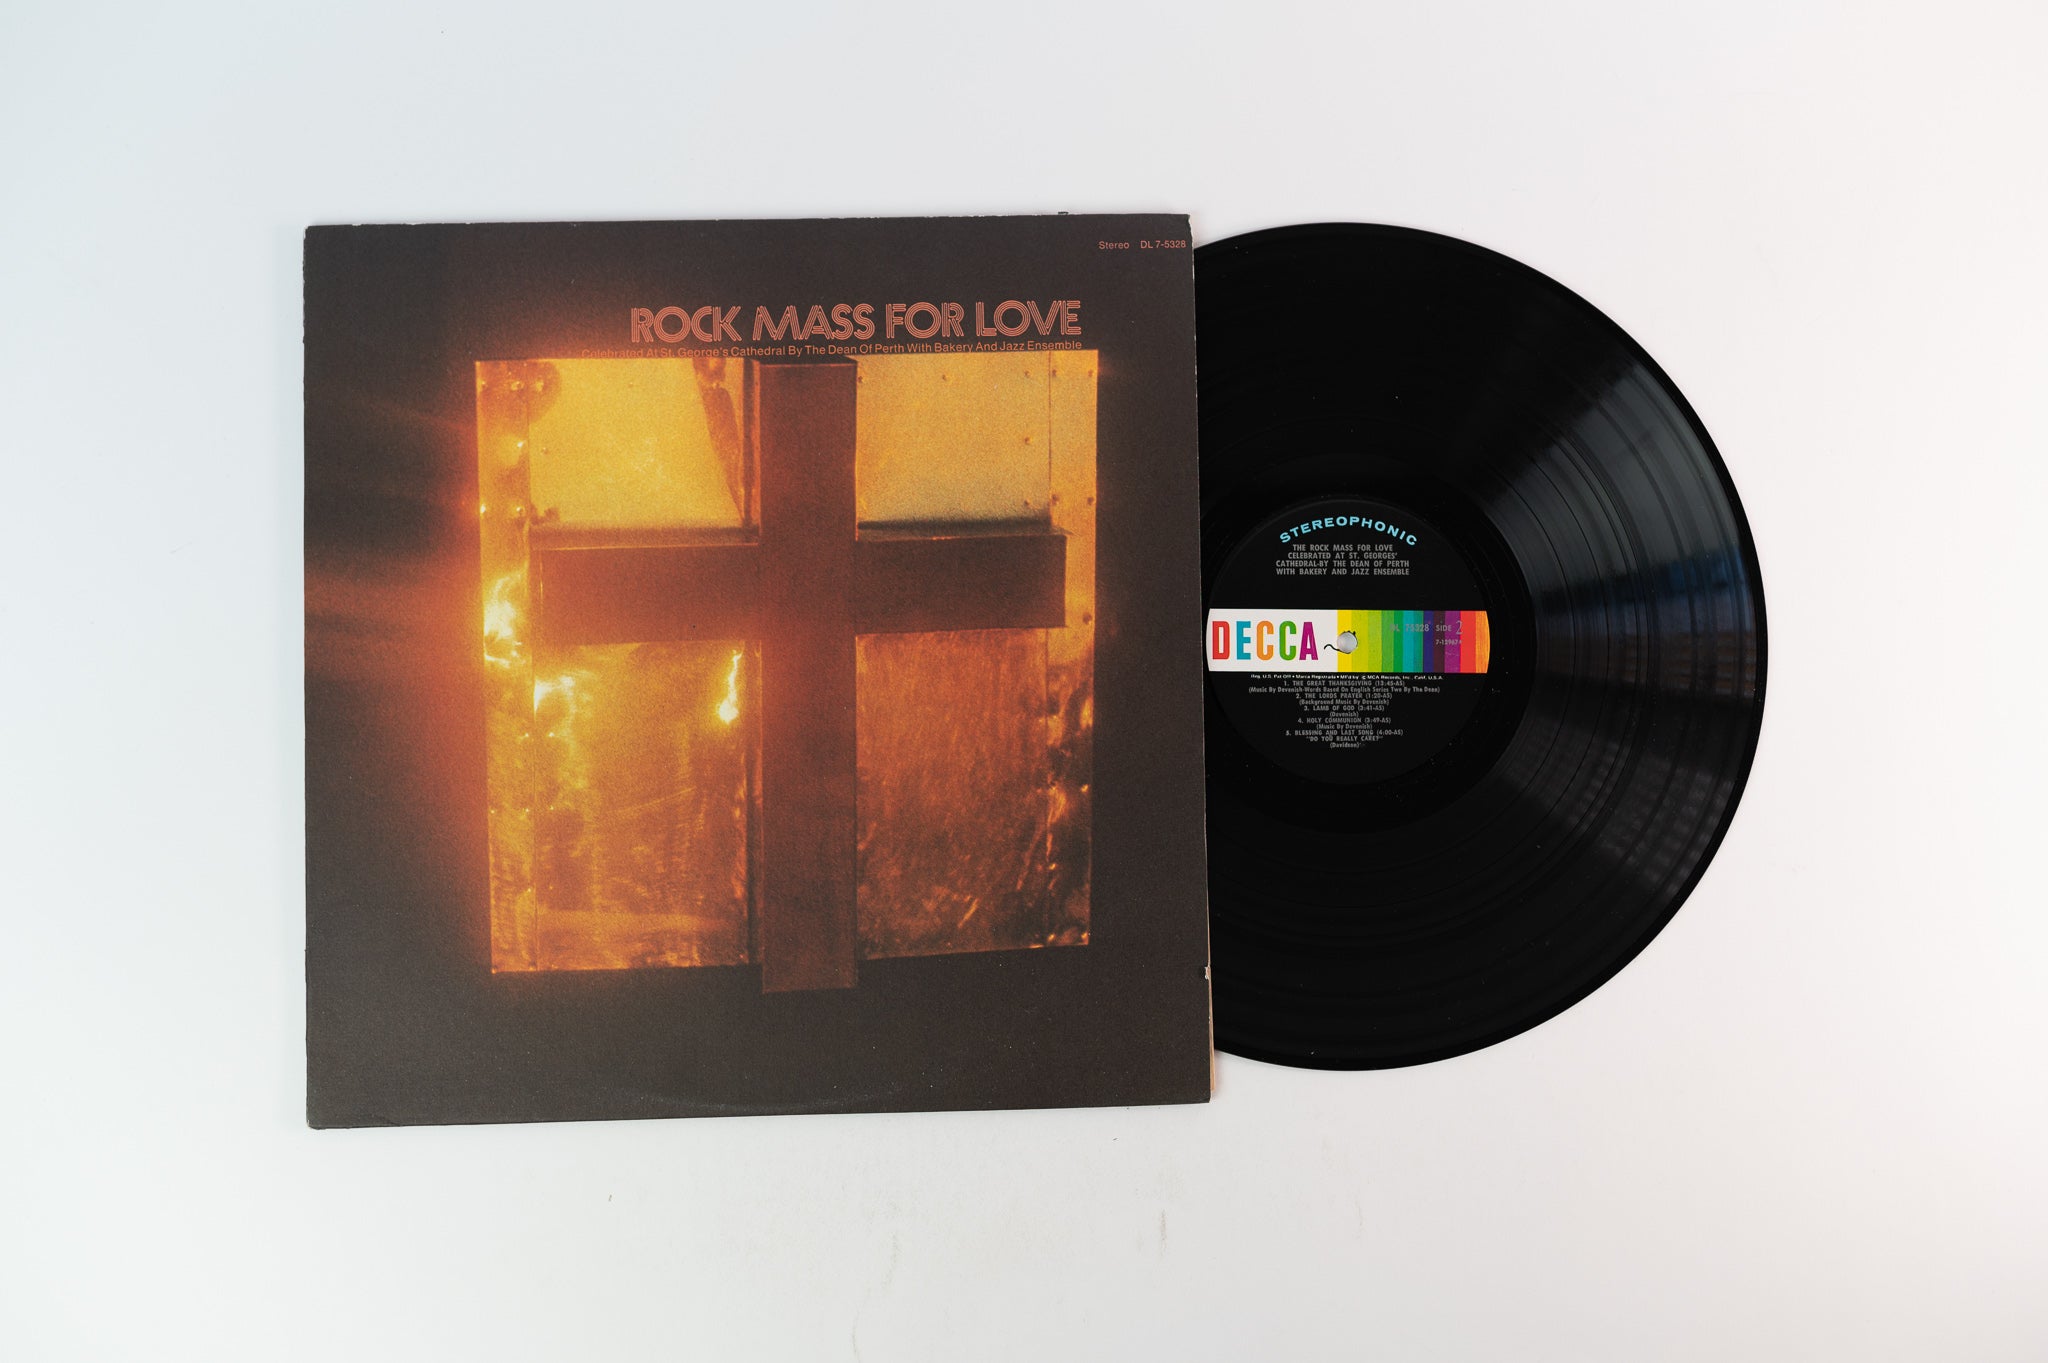 Bakery - Rock Mass For Love on Decca Stereo